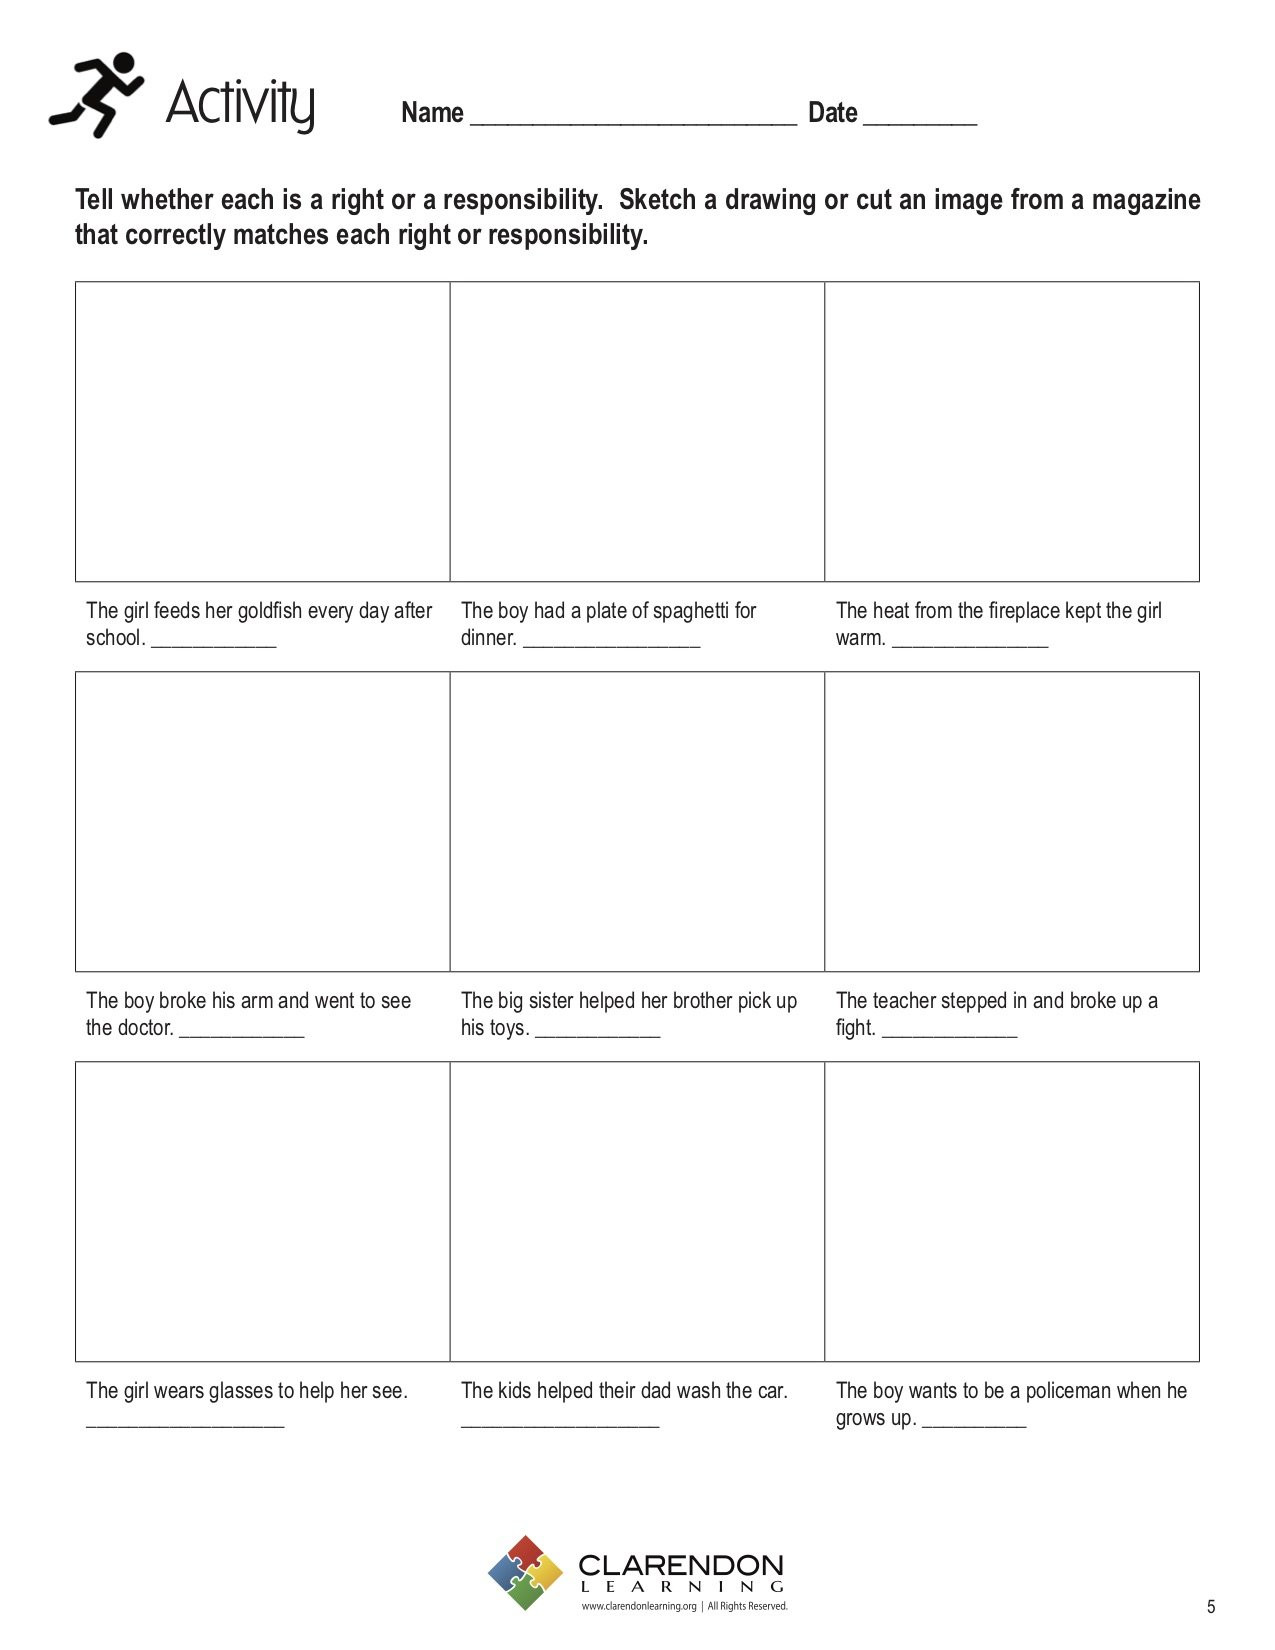 Rights and Responsibilities Worksheet Rights and Responsibilities